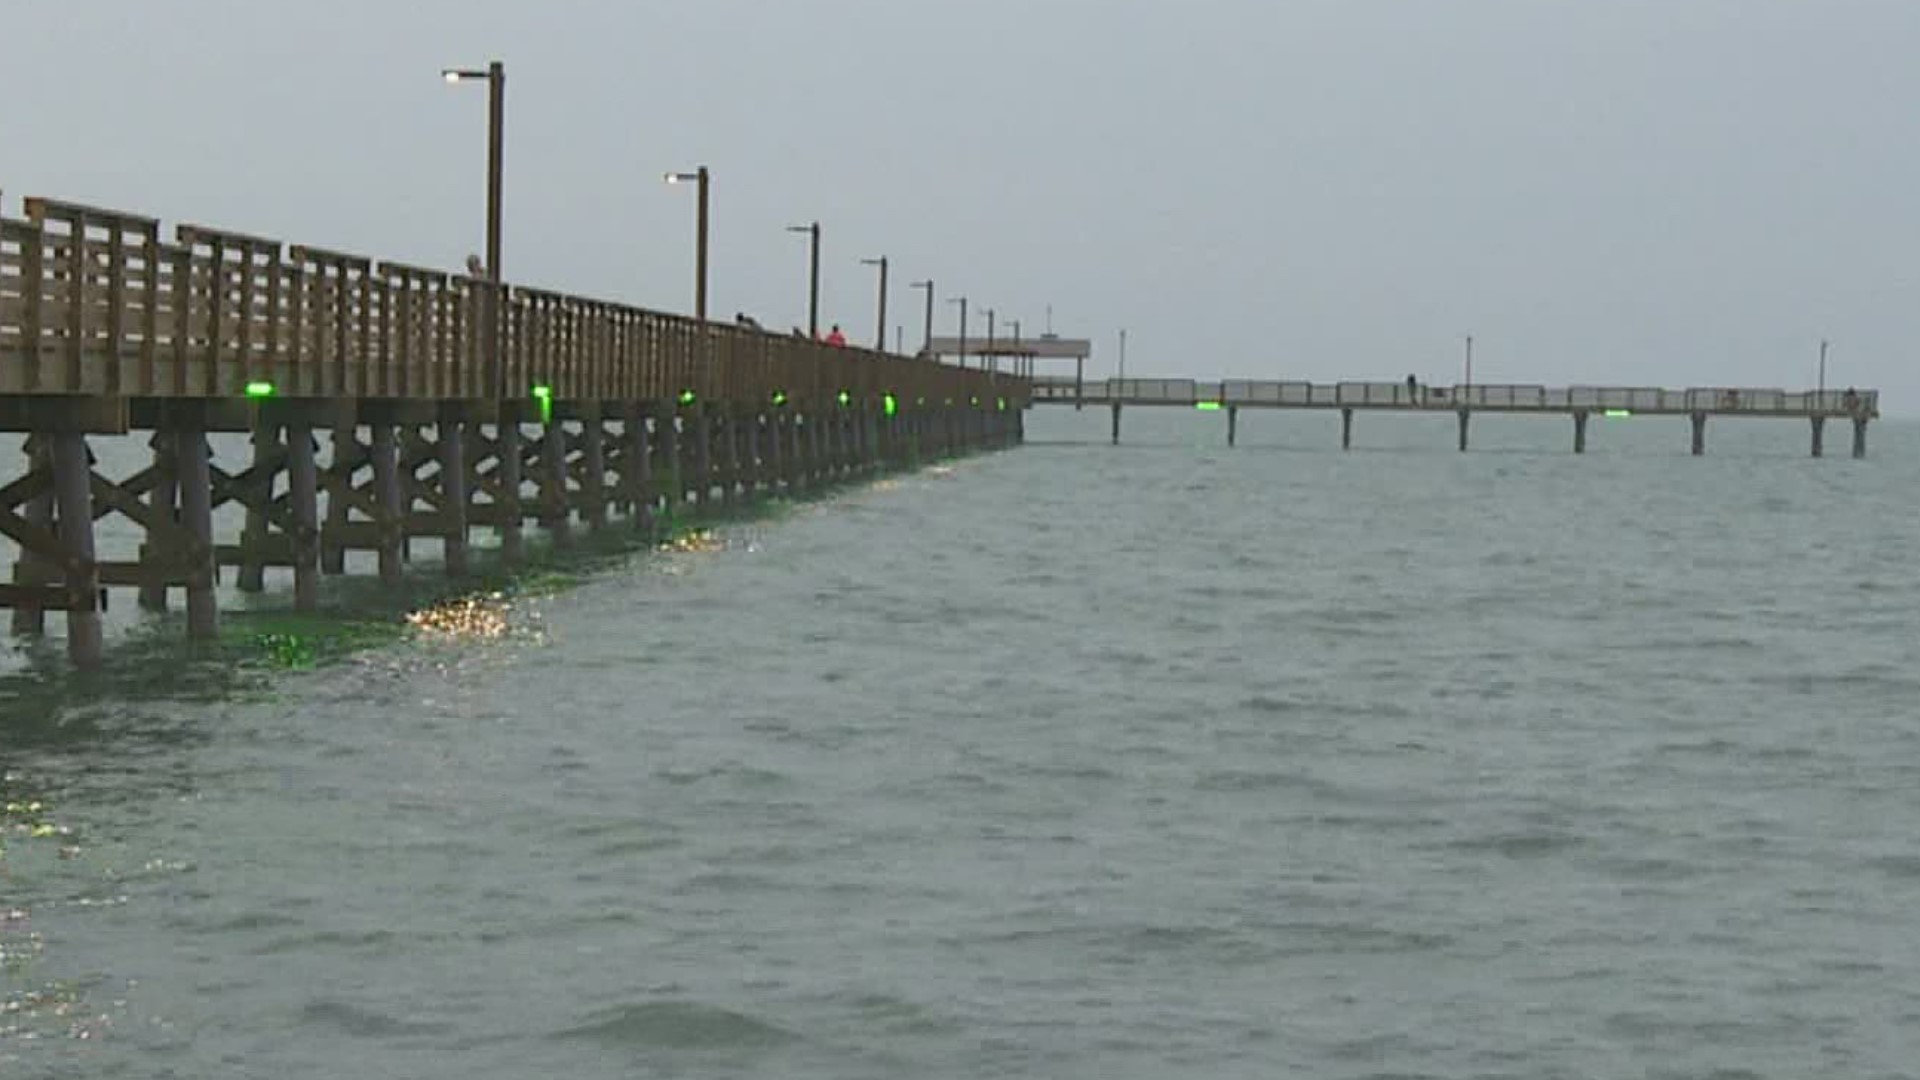 The 1,200 foot pier is open 24/7 and comes with plenty of lighting for night fishing.